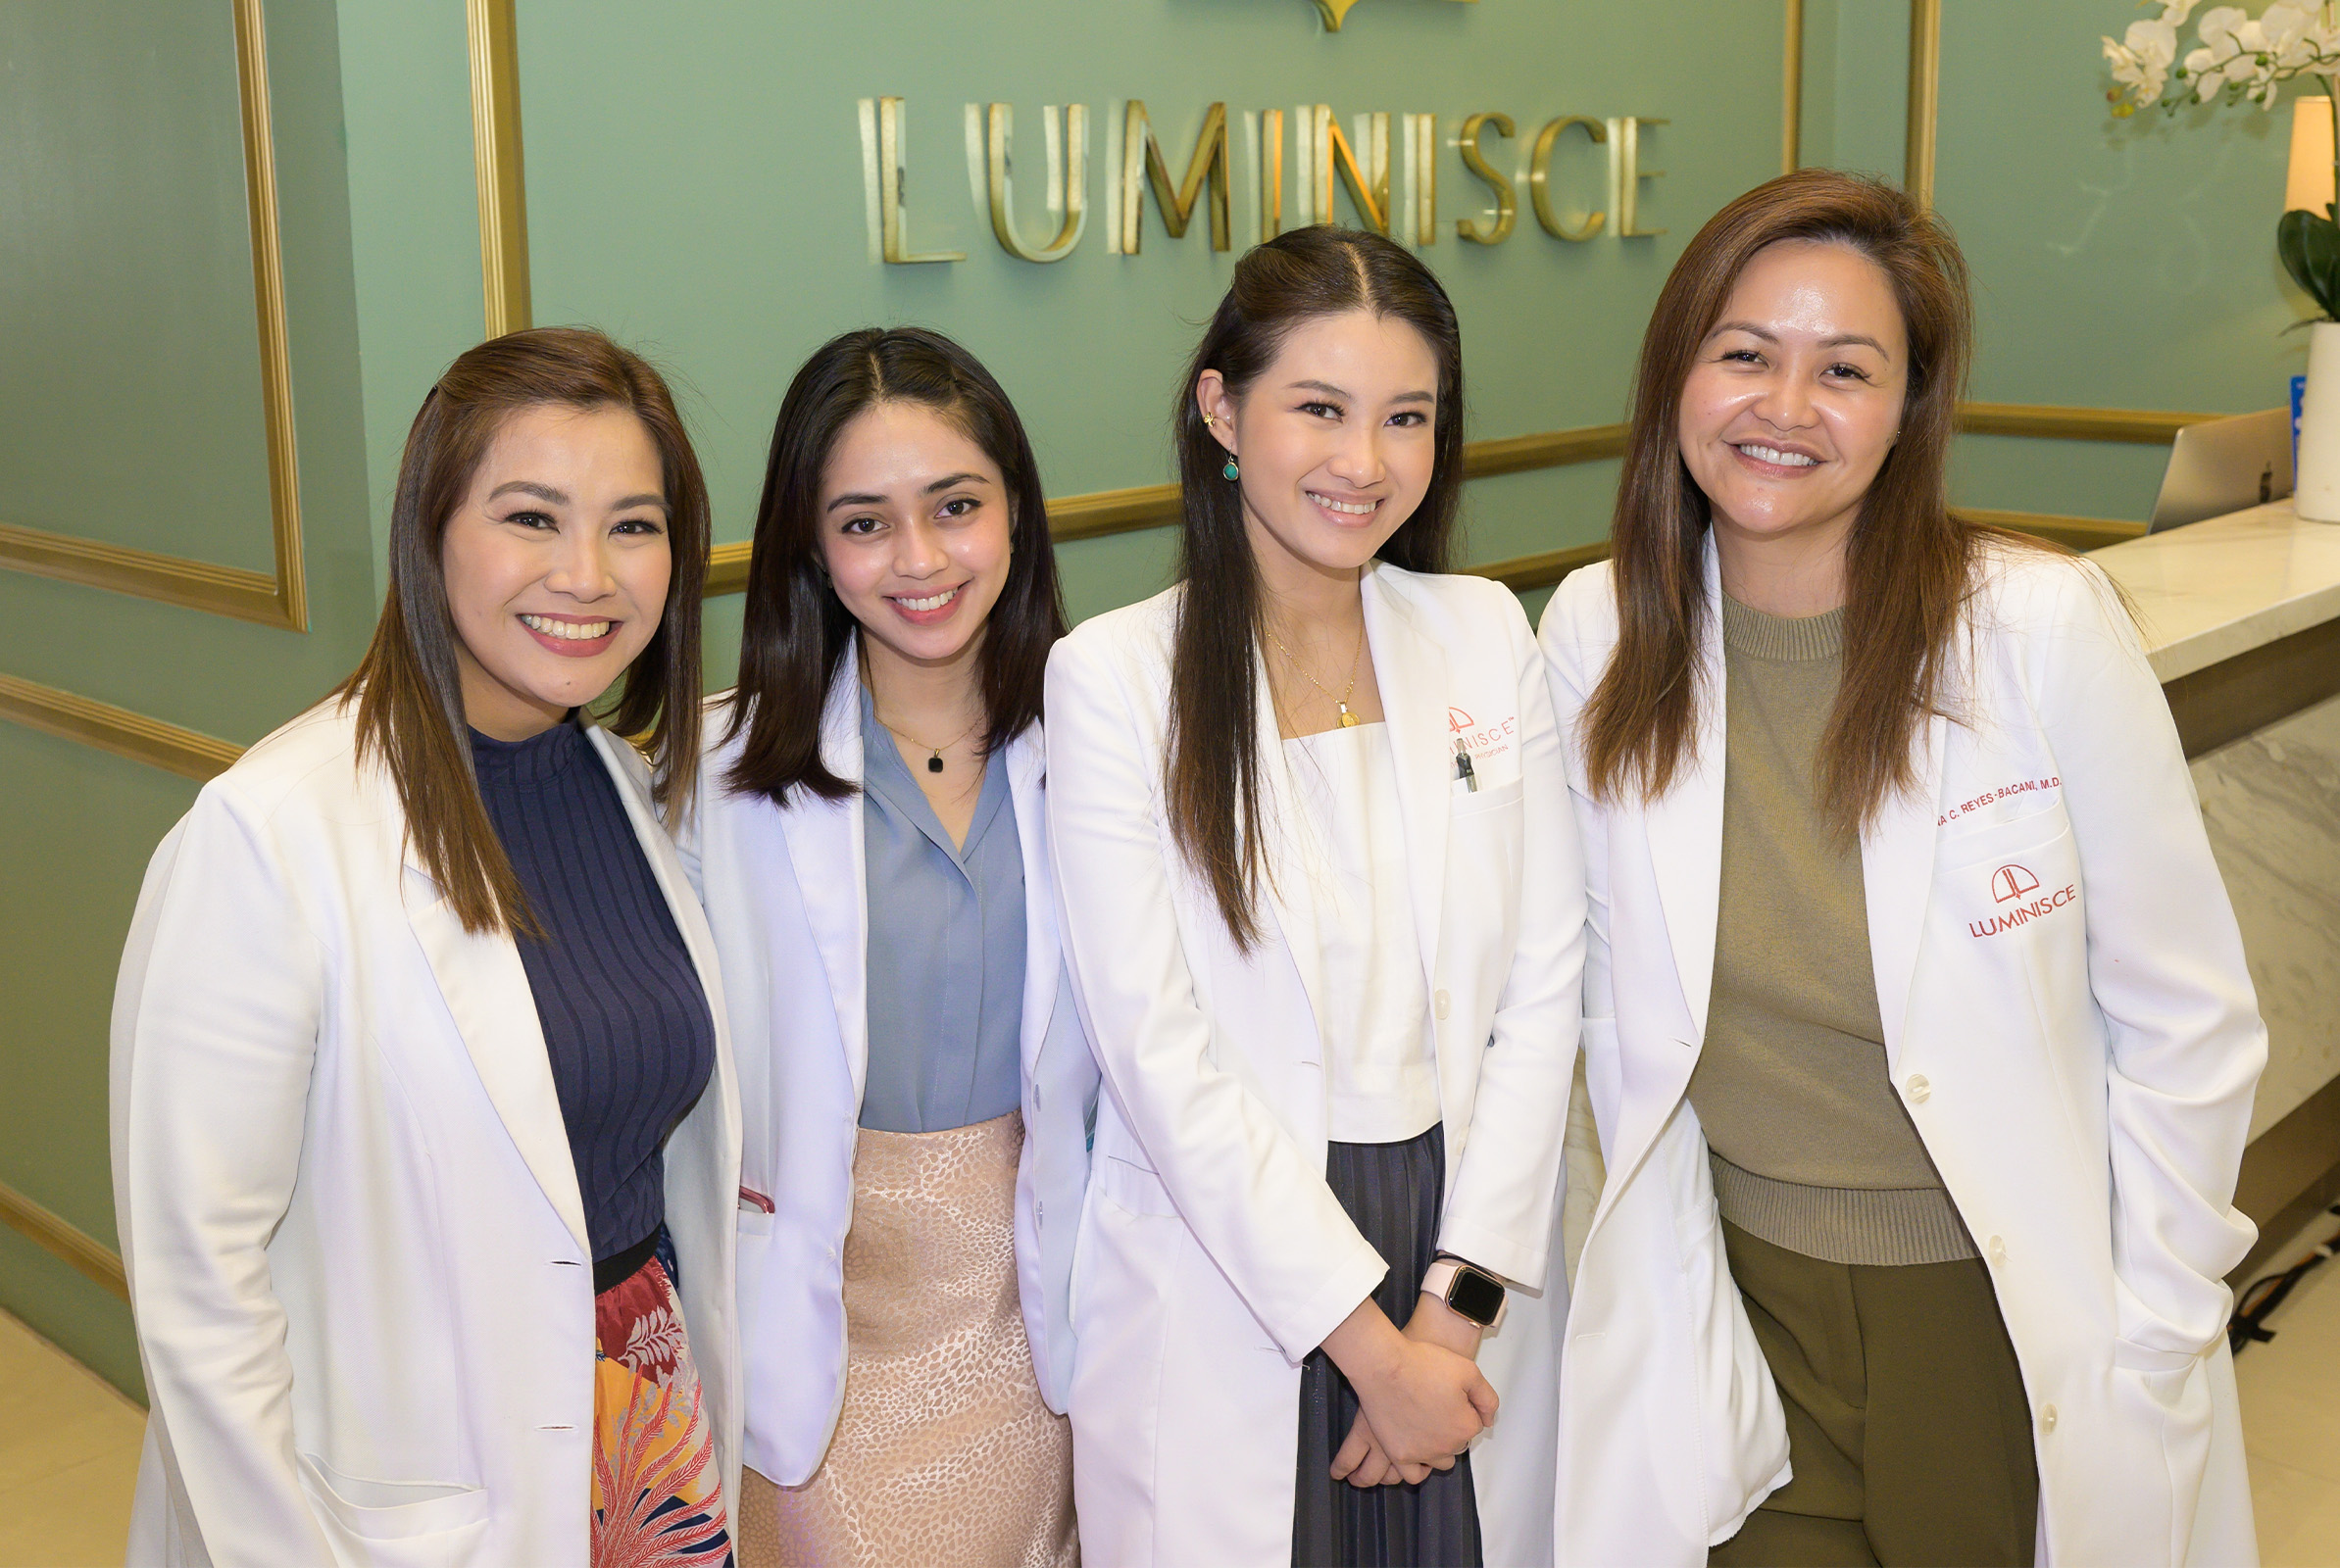 Ceejay Tapales-Marasigan, Dr. Criselle Martinez, Dr. Pauline Diño, and Dr. Kaycee Reyes Luminisce’s Ultheraphy